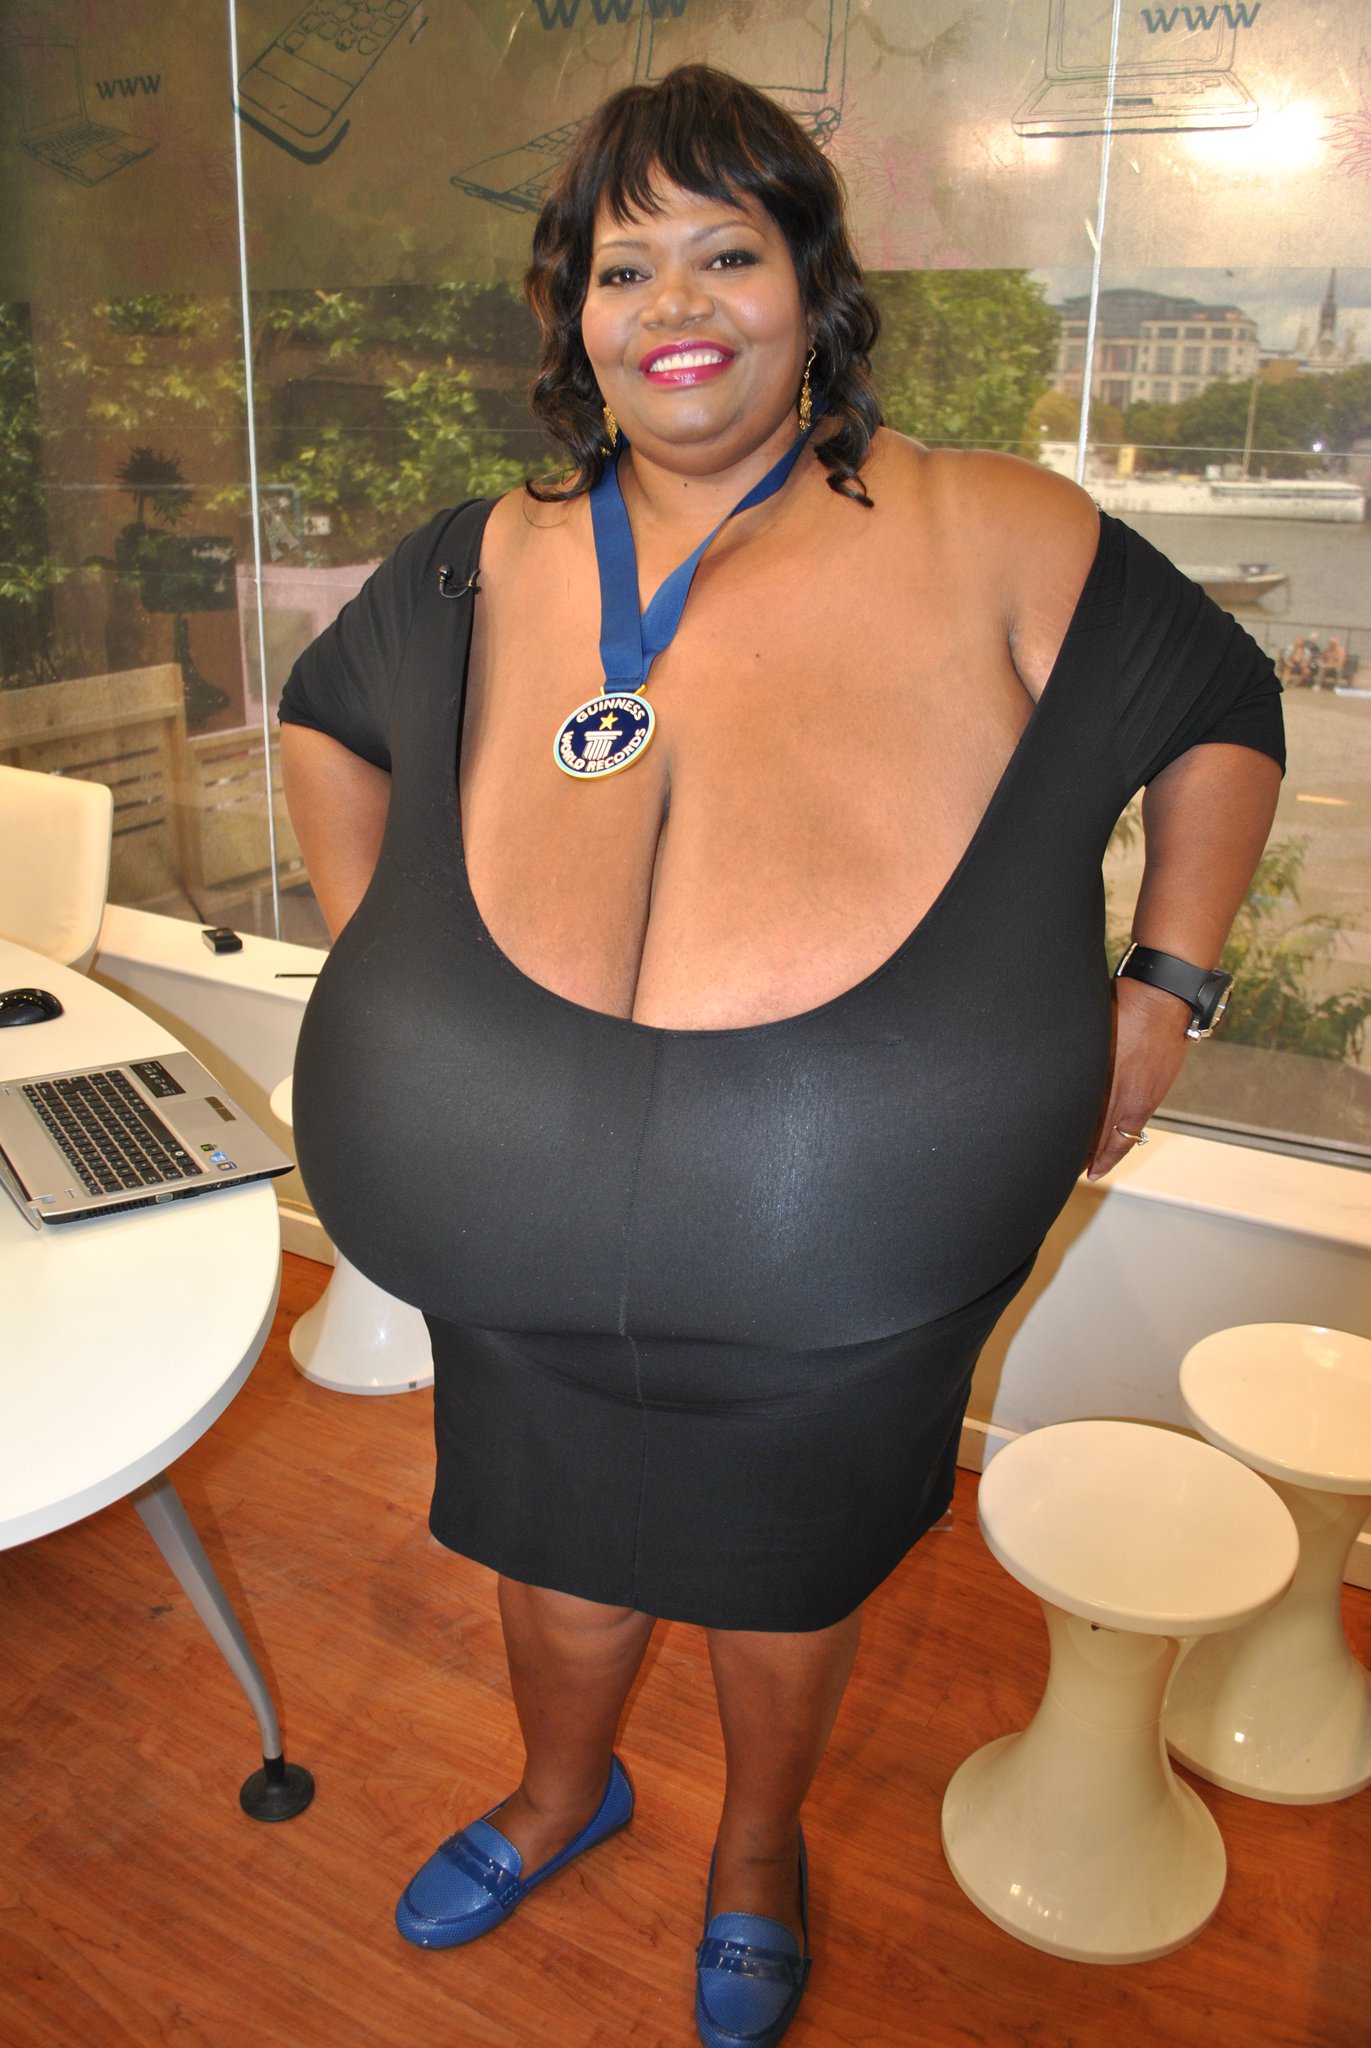 angie coleman jackson add largest boobs on record photo